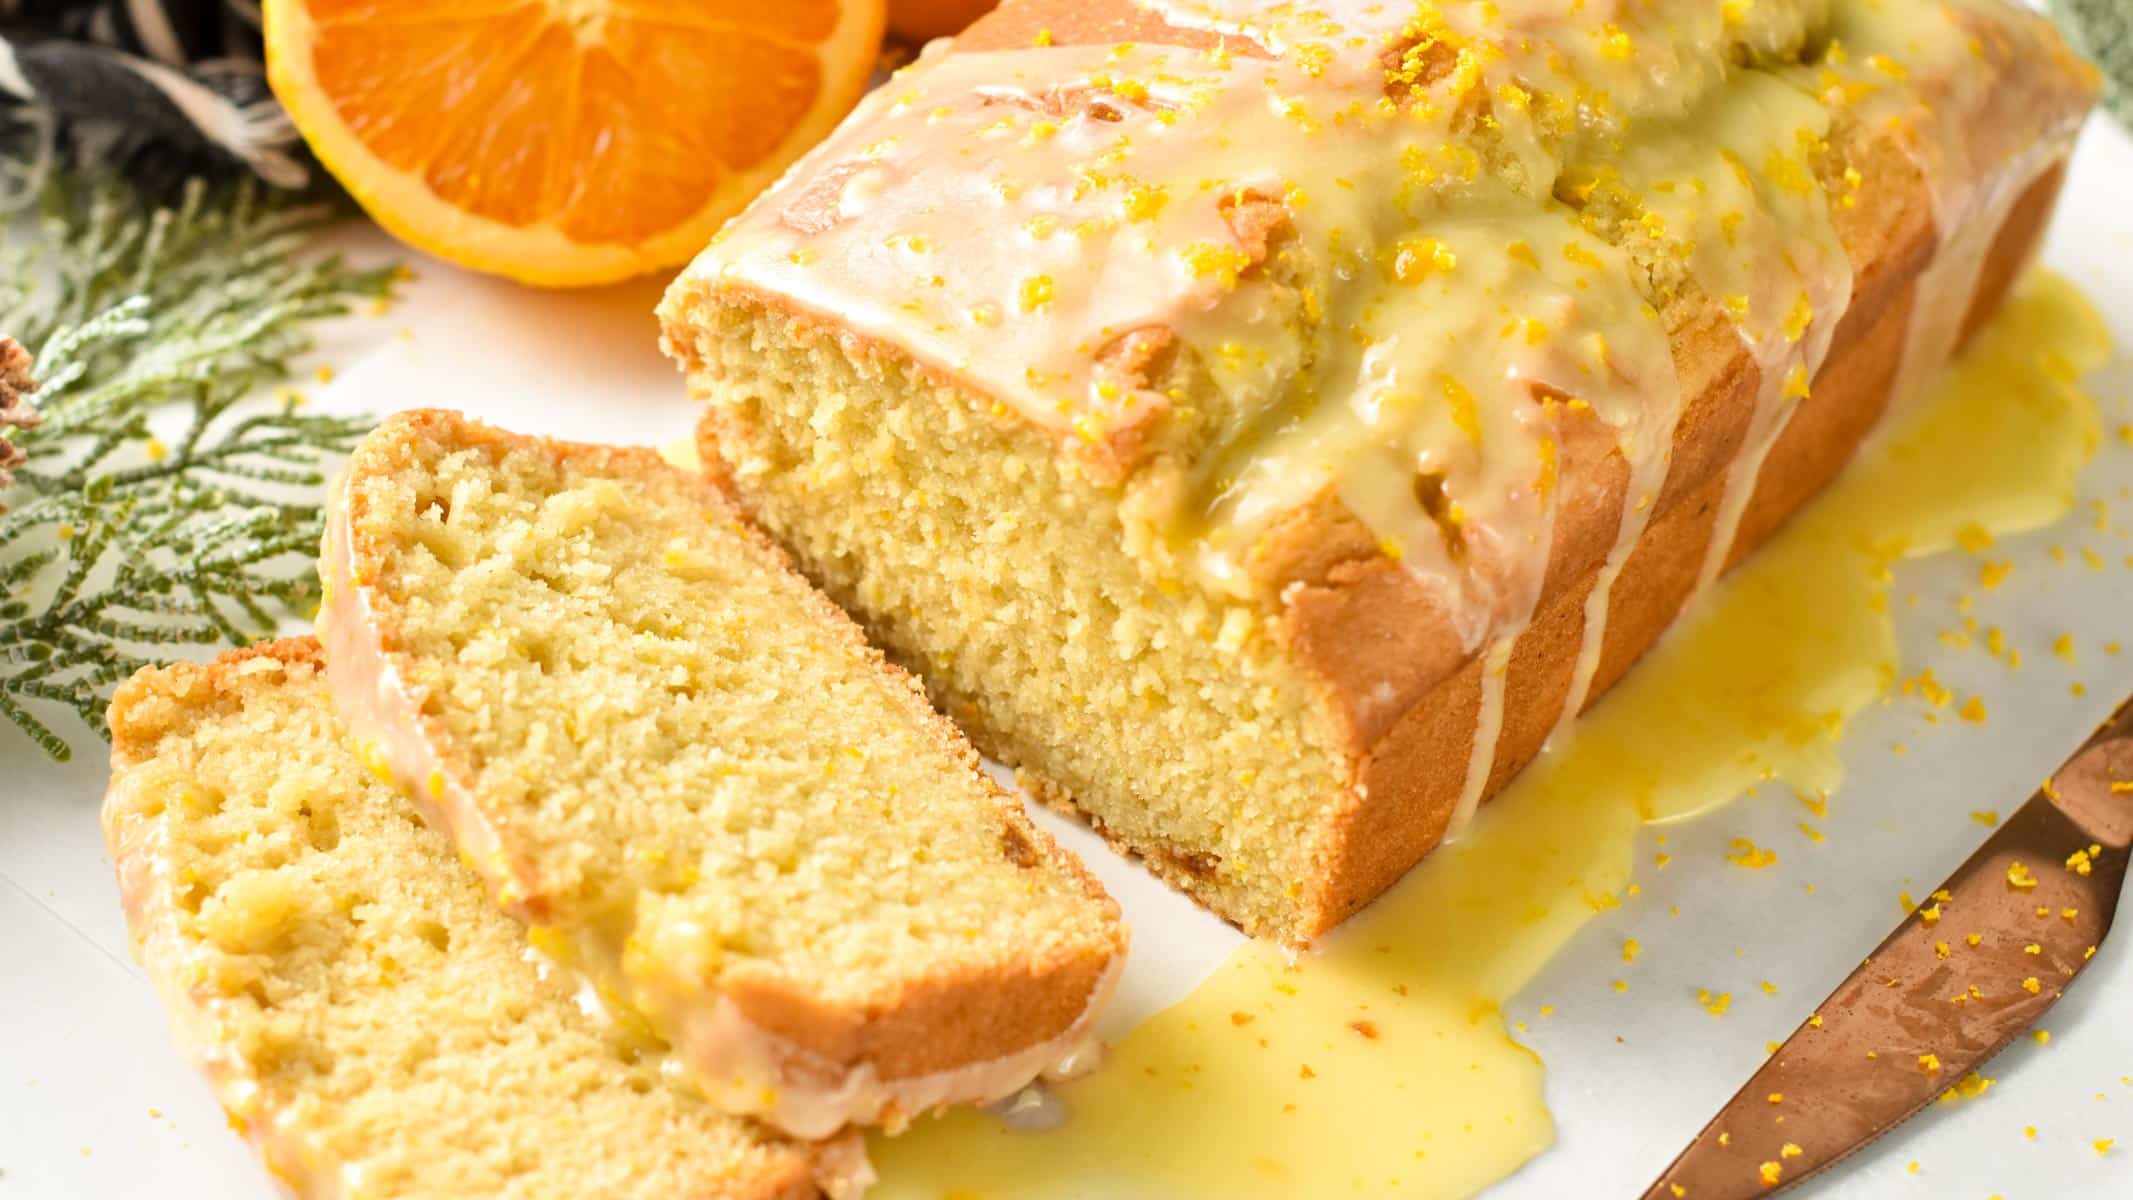 This Orange Pound Cake is most easy moist pound cake with tangy orange flavors and delicious sweet orange glaze. Plus, this pound cake is allergy friendly, made with no eggs or dairy.